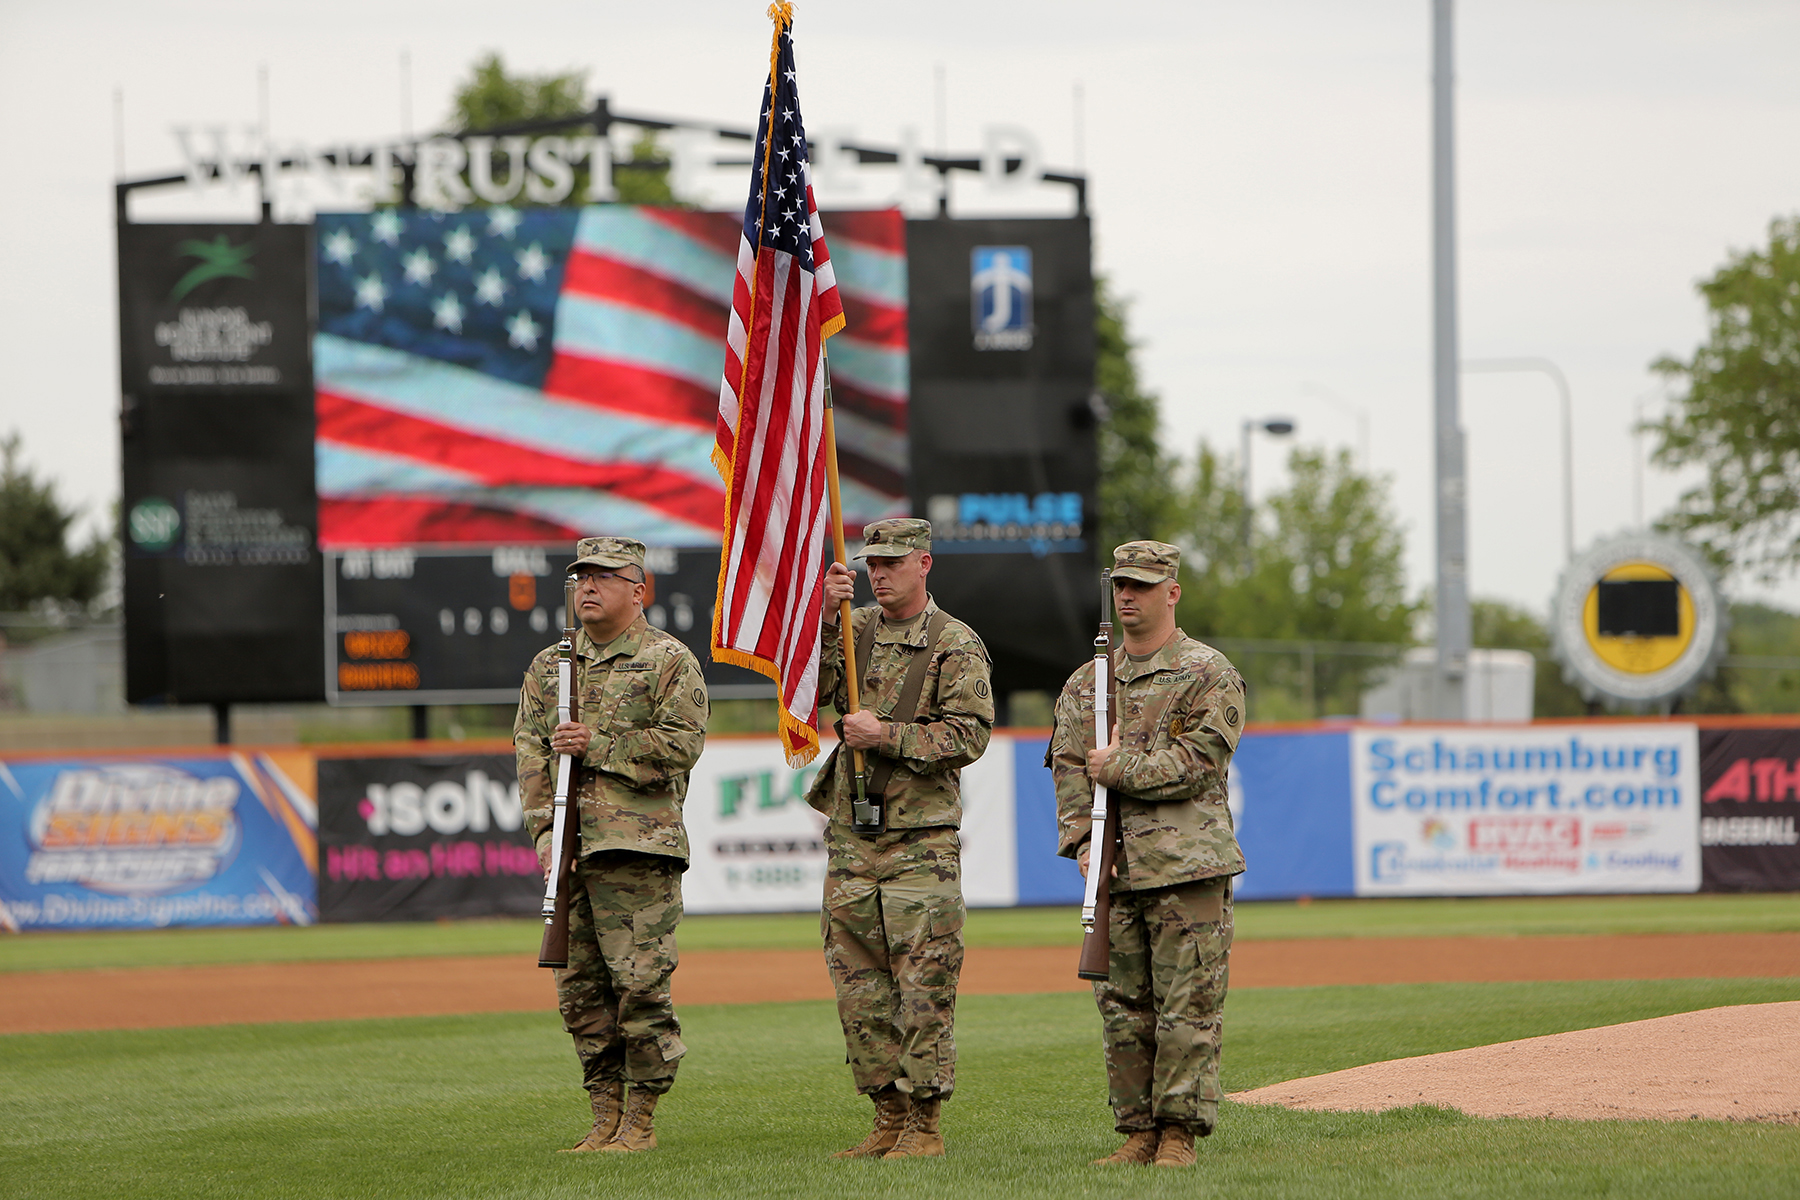 Chicagoland baseball team honors service during Frontier League baseball